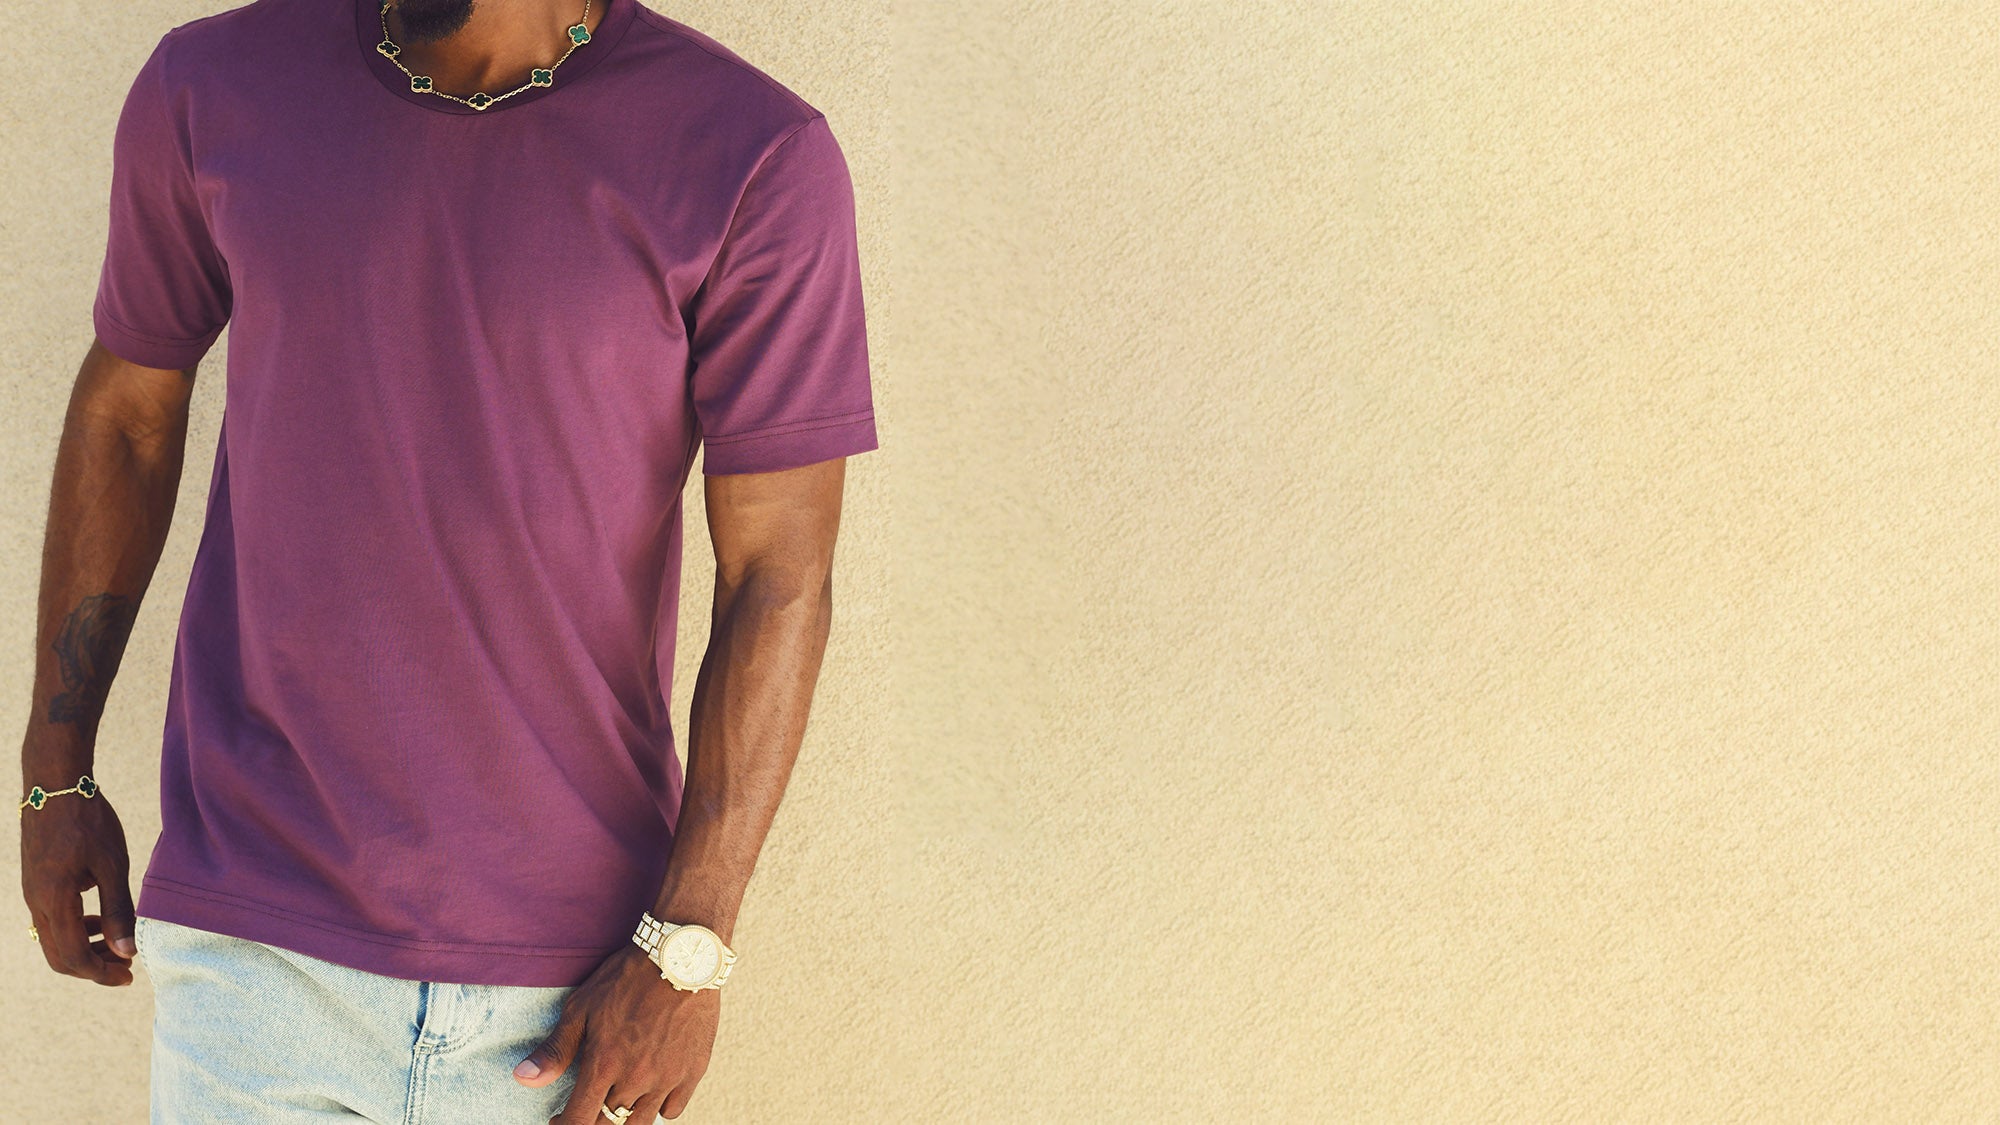 Model is wearing our light aubergine colored tee-shirt. It is a short sleeve, crew neck cotton tee in a purple color.